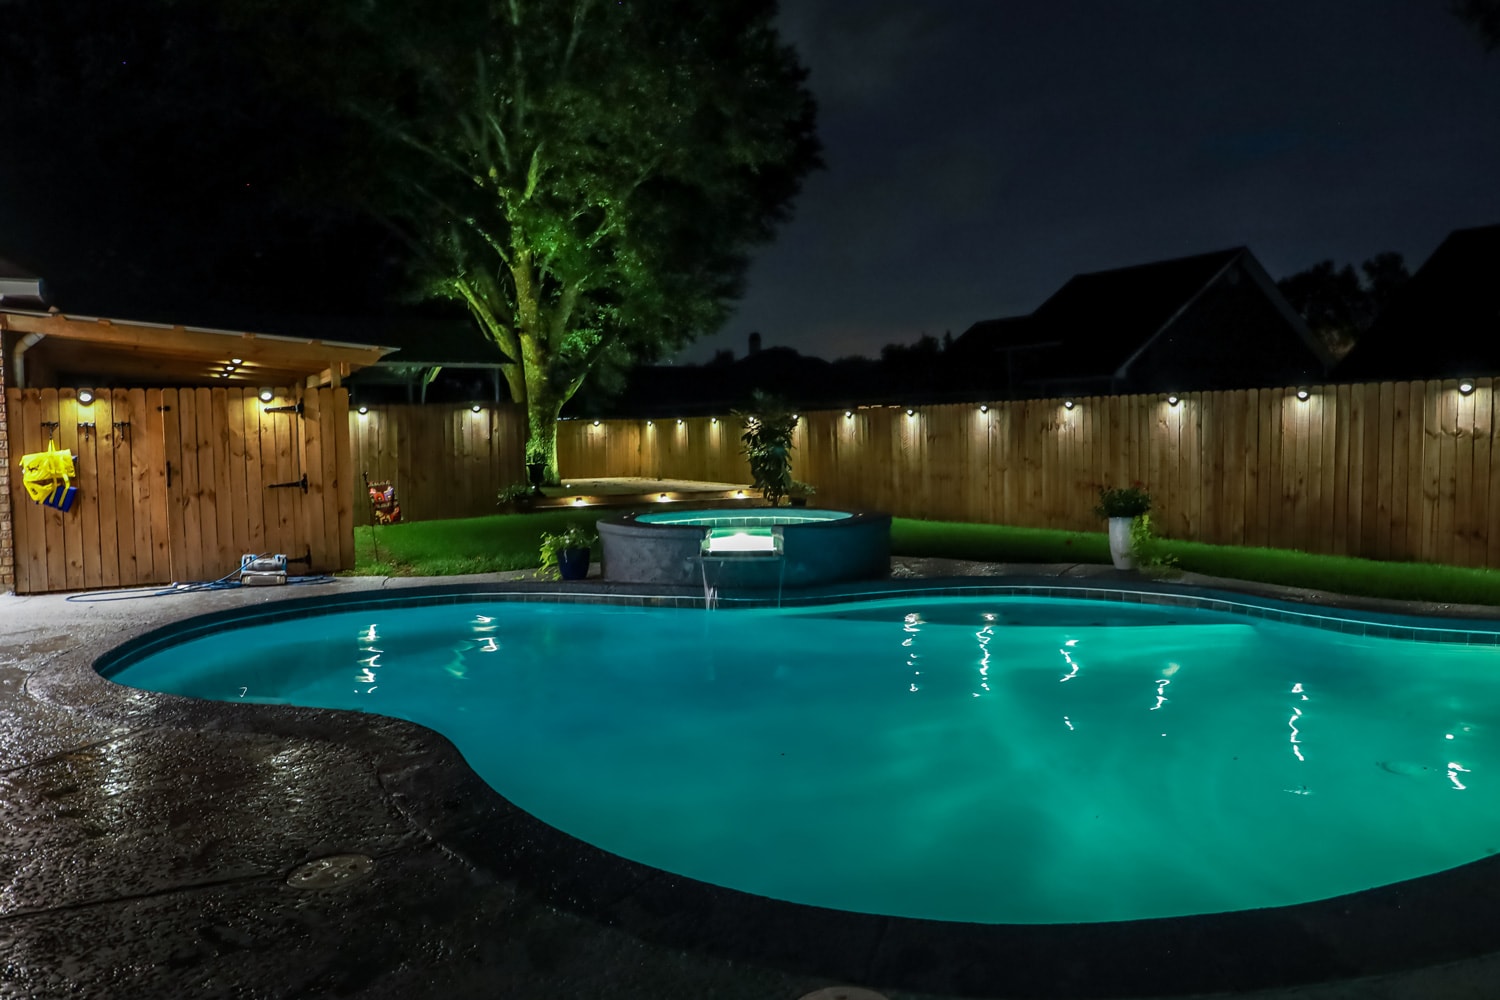 A backyard swimming pool and Hot Tub hot tob at night with solar lights around the fence for privacy and illumination.